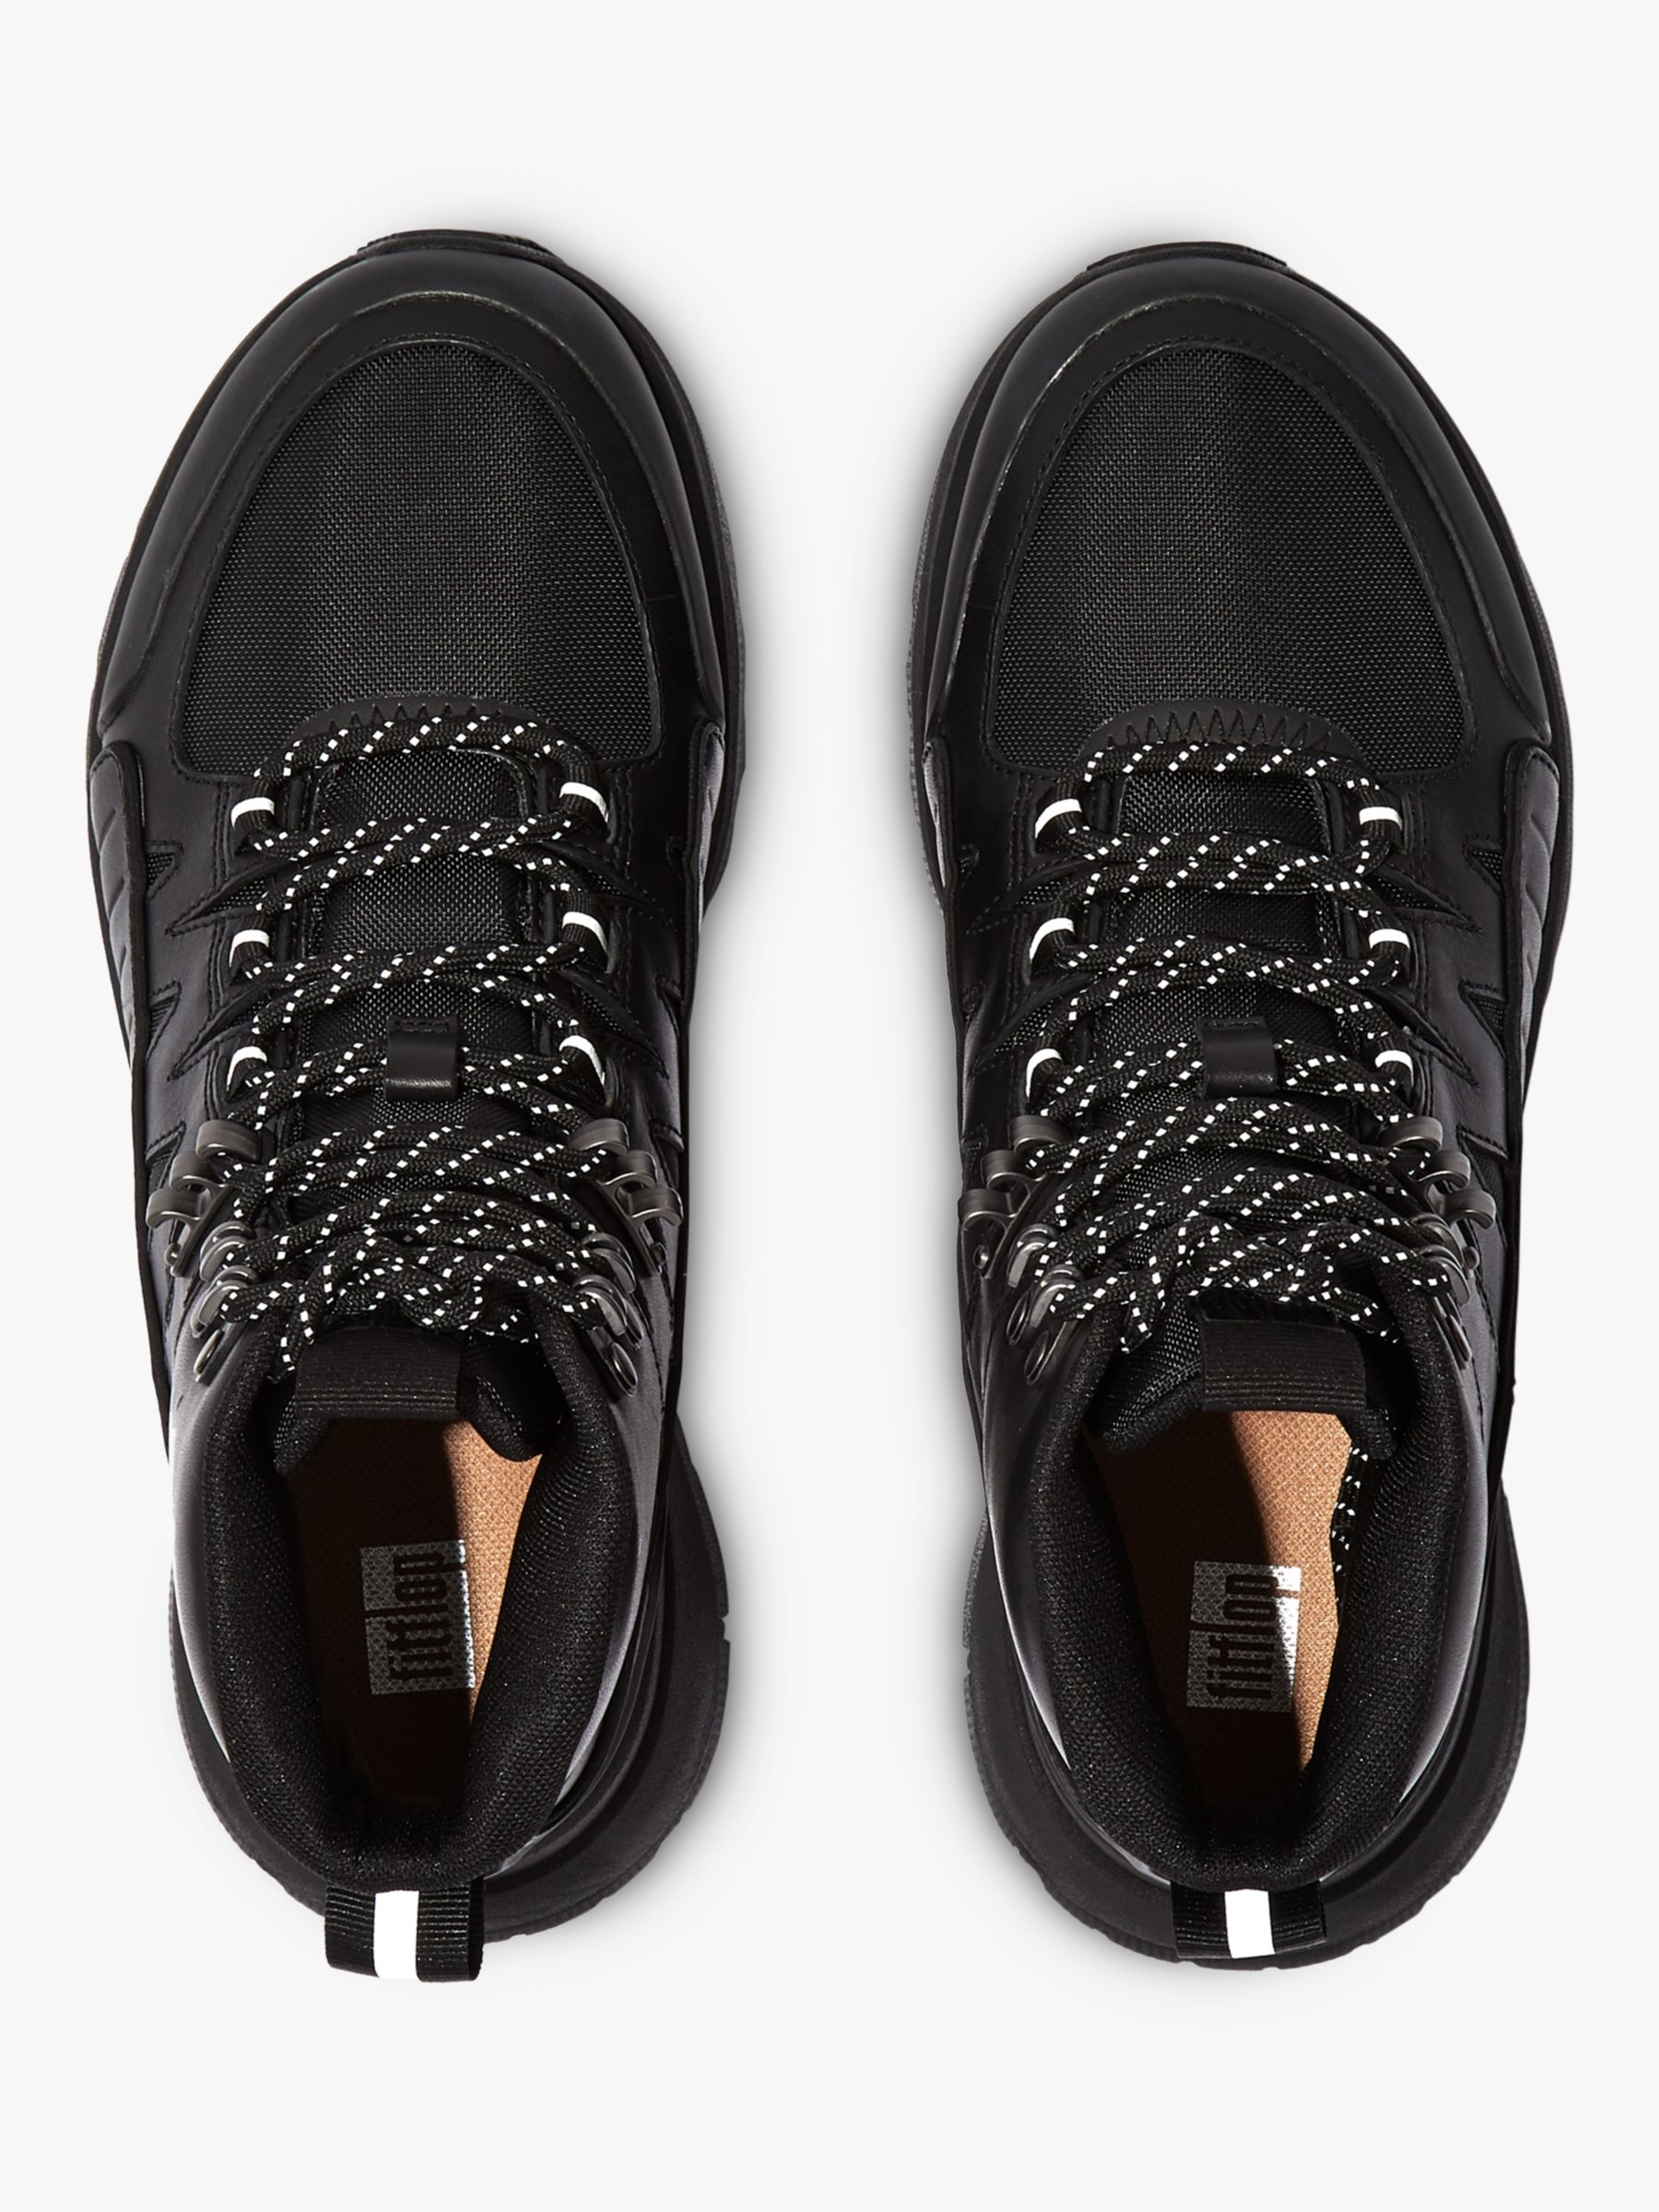 Buy FitFlop Neo Leather Mix Hiking Shoes, Black Online at johnlewis.com